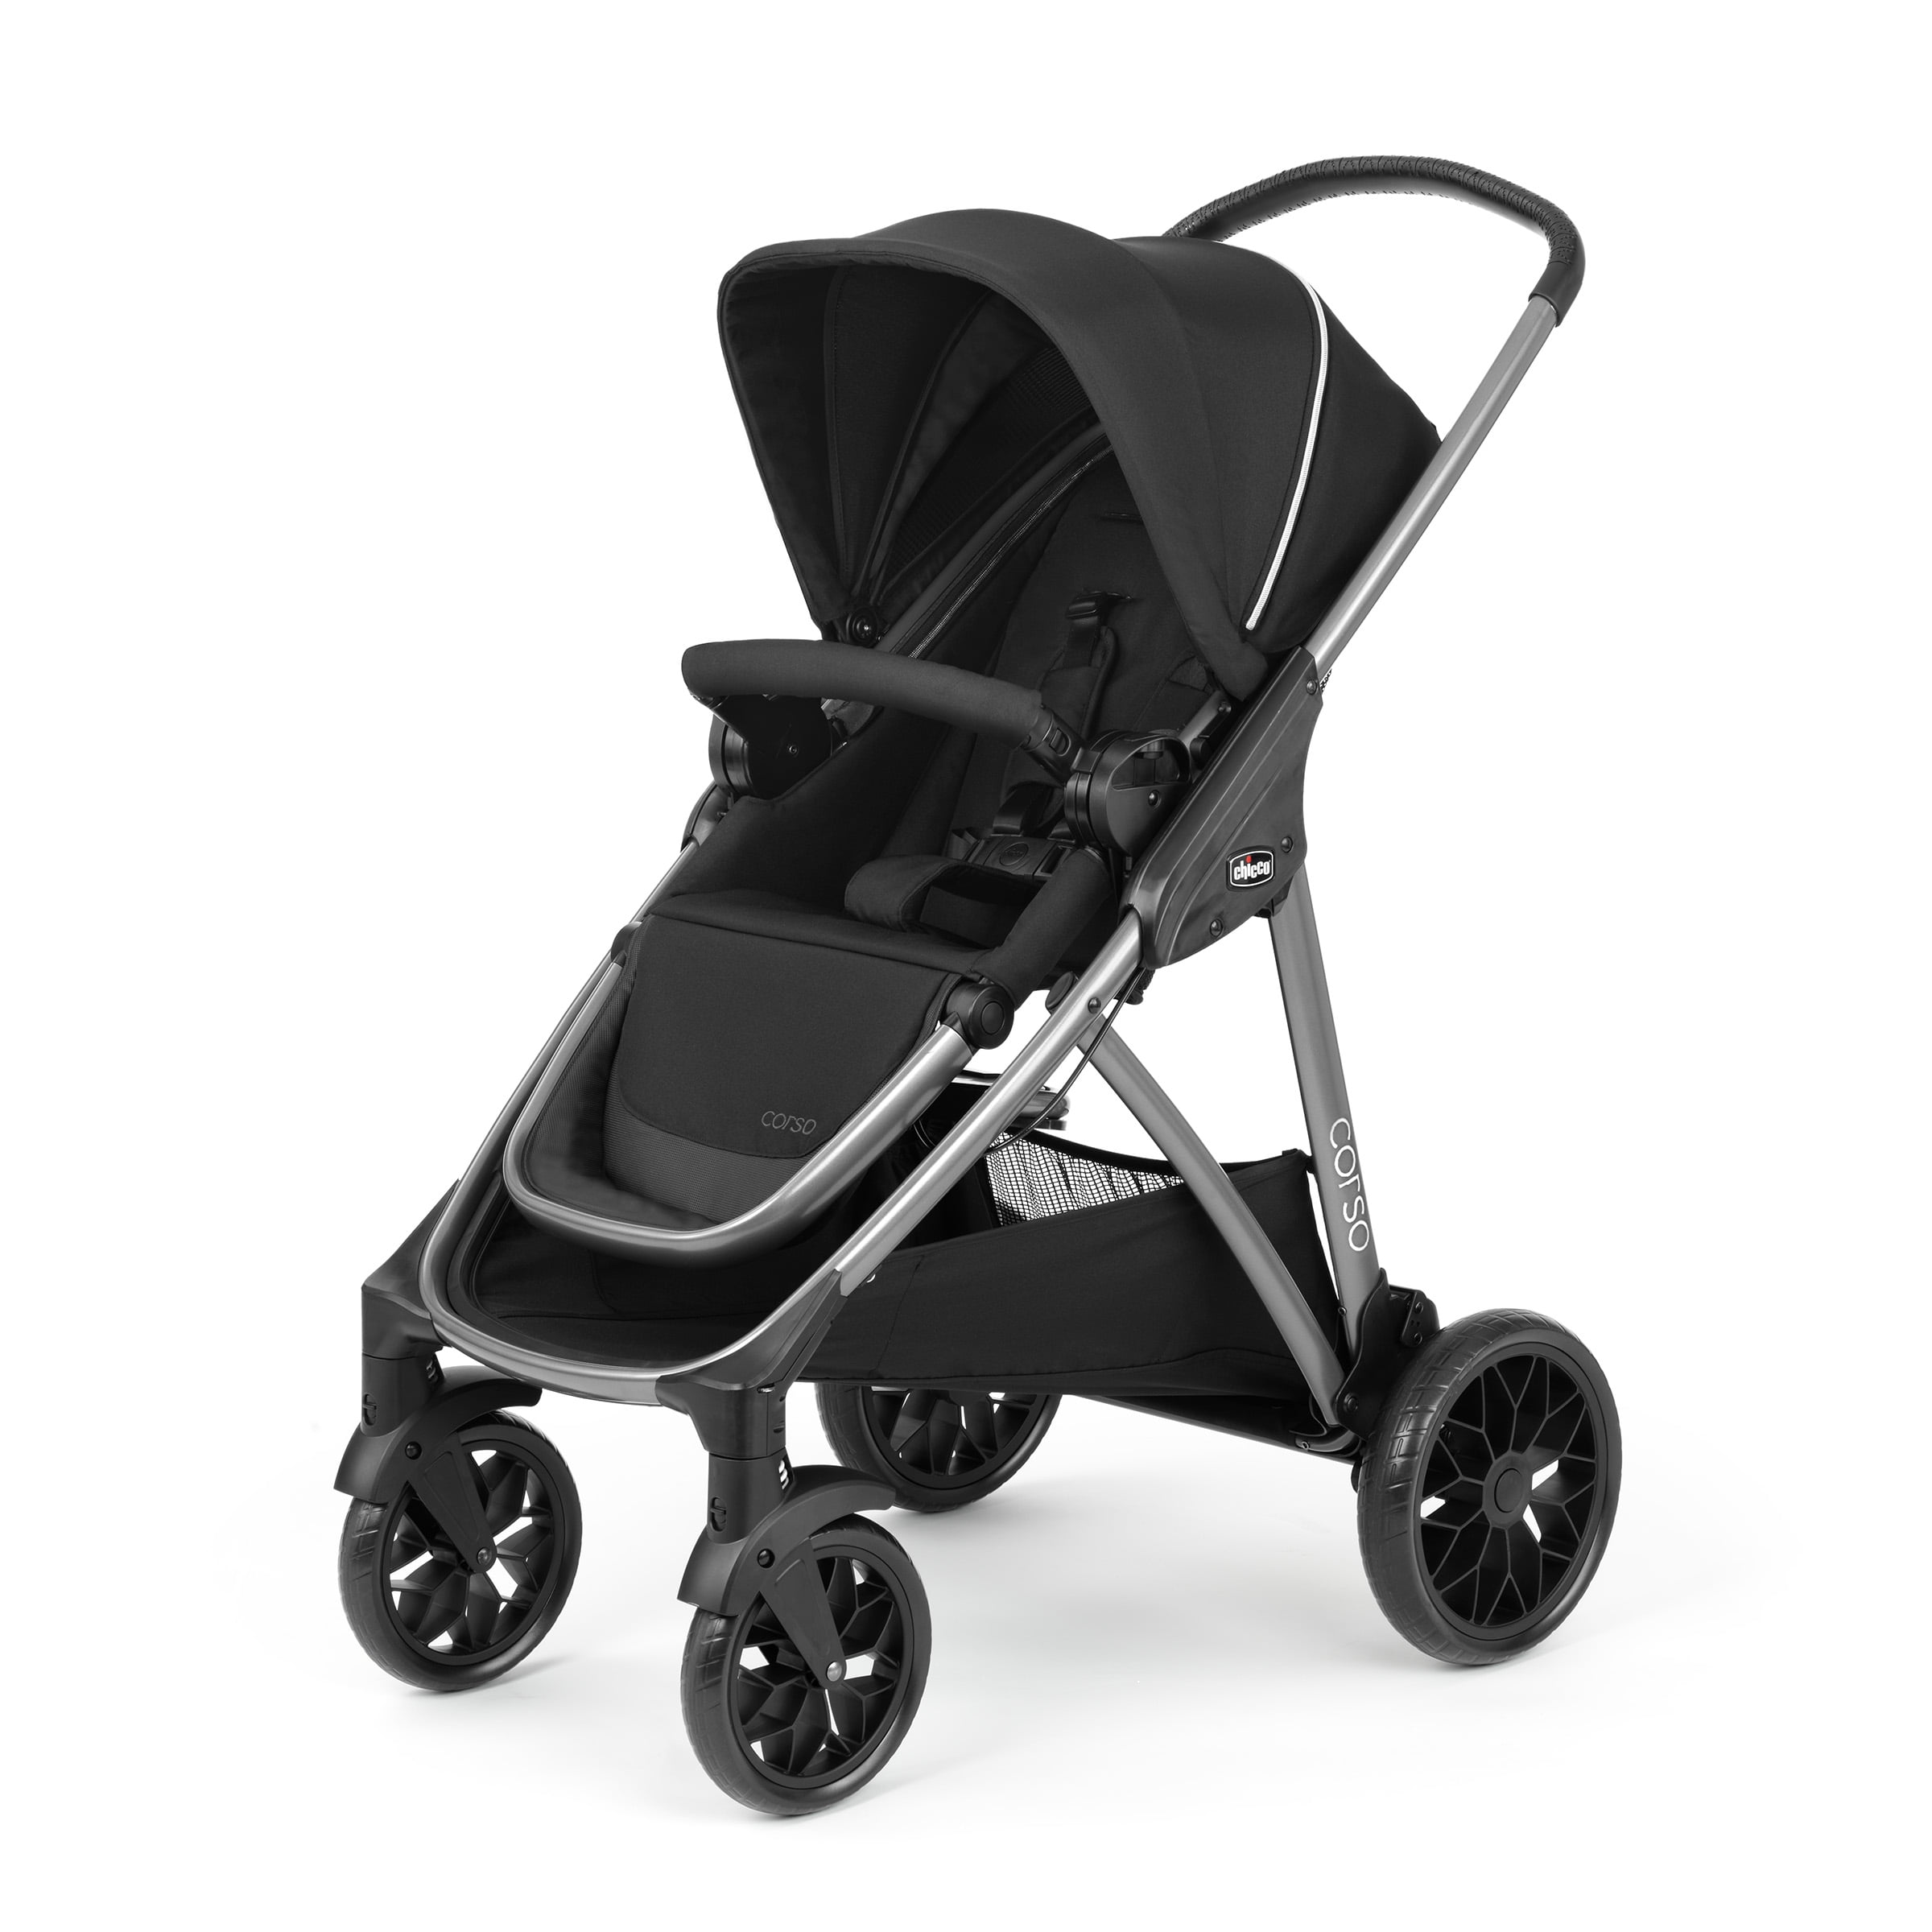 Paprika Chicco Minimo Lightweight  Toddler Child's Pushchair Stroller